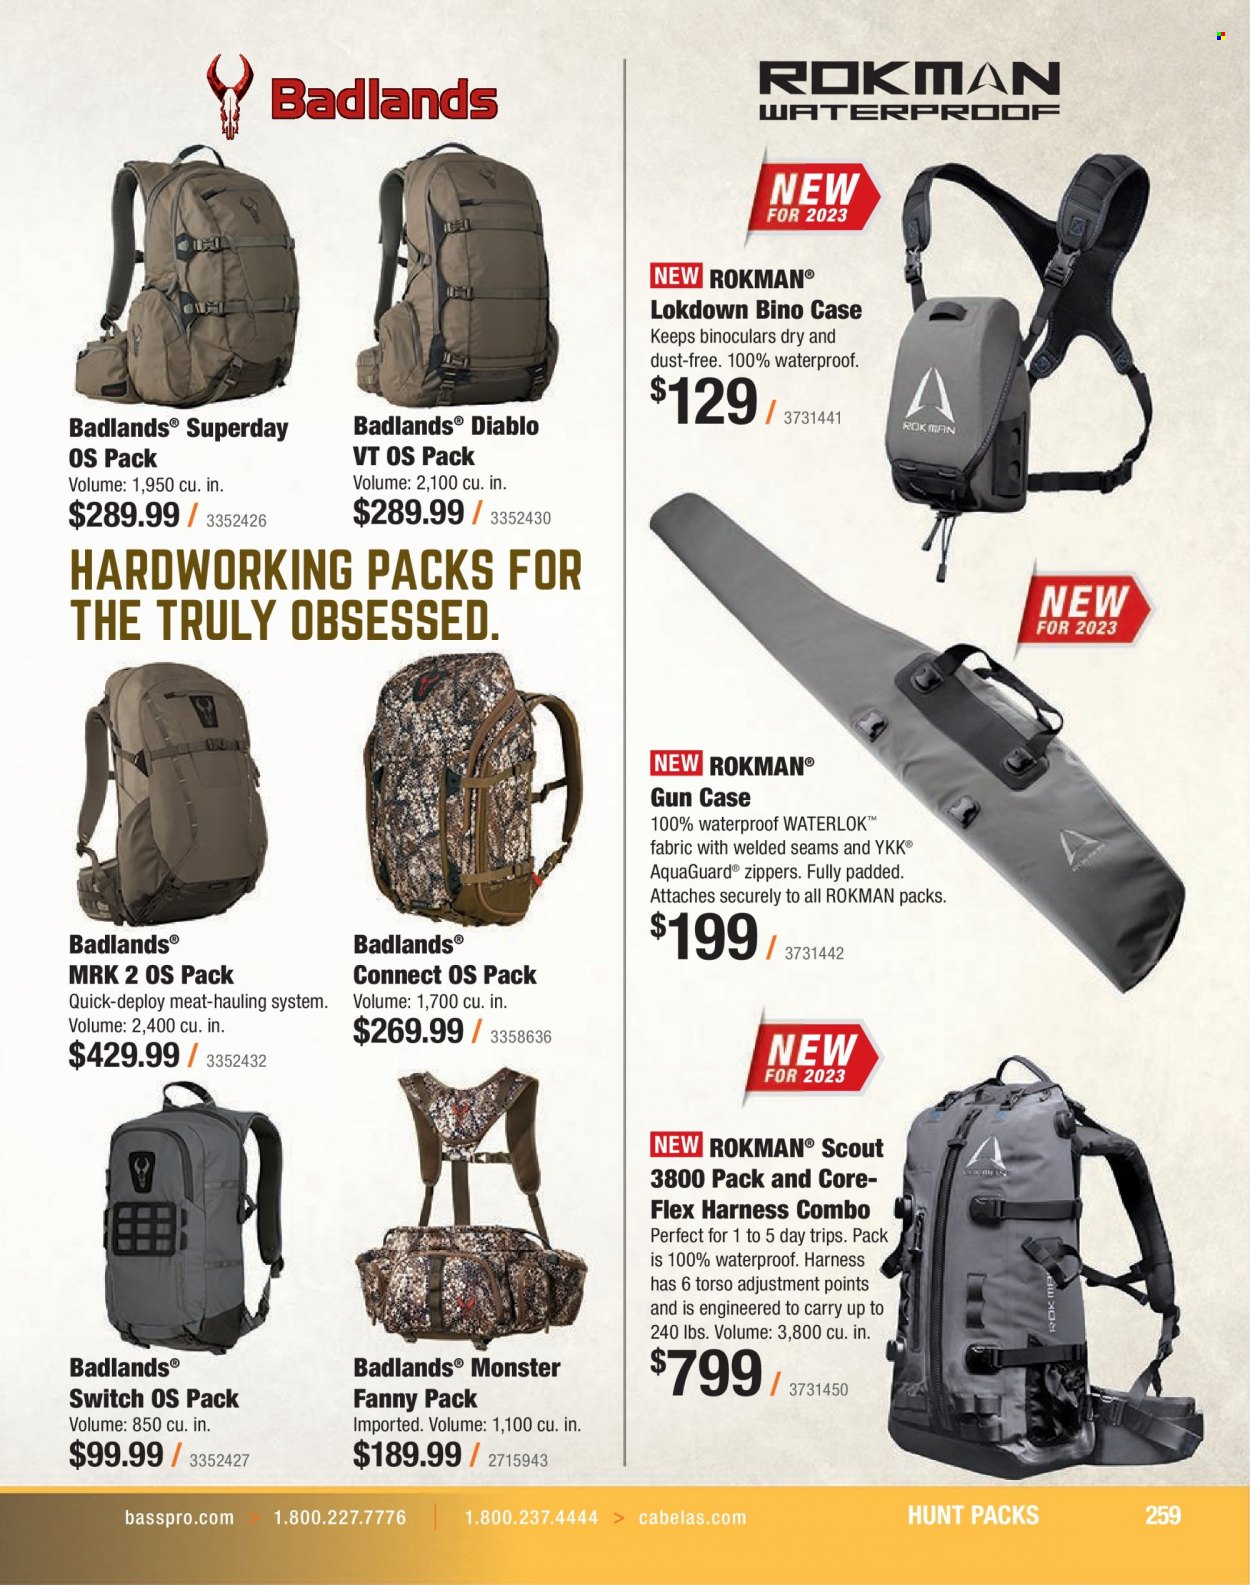 Bass Pro Shops flyer . Page 259.